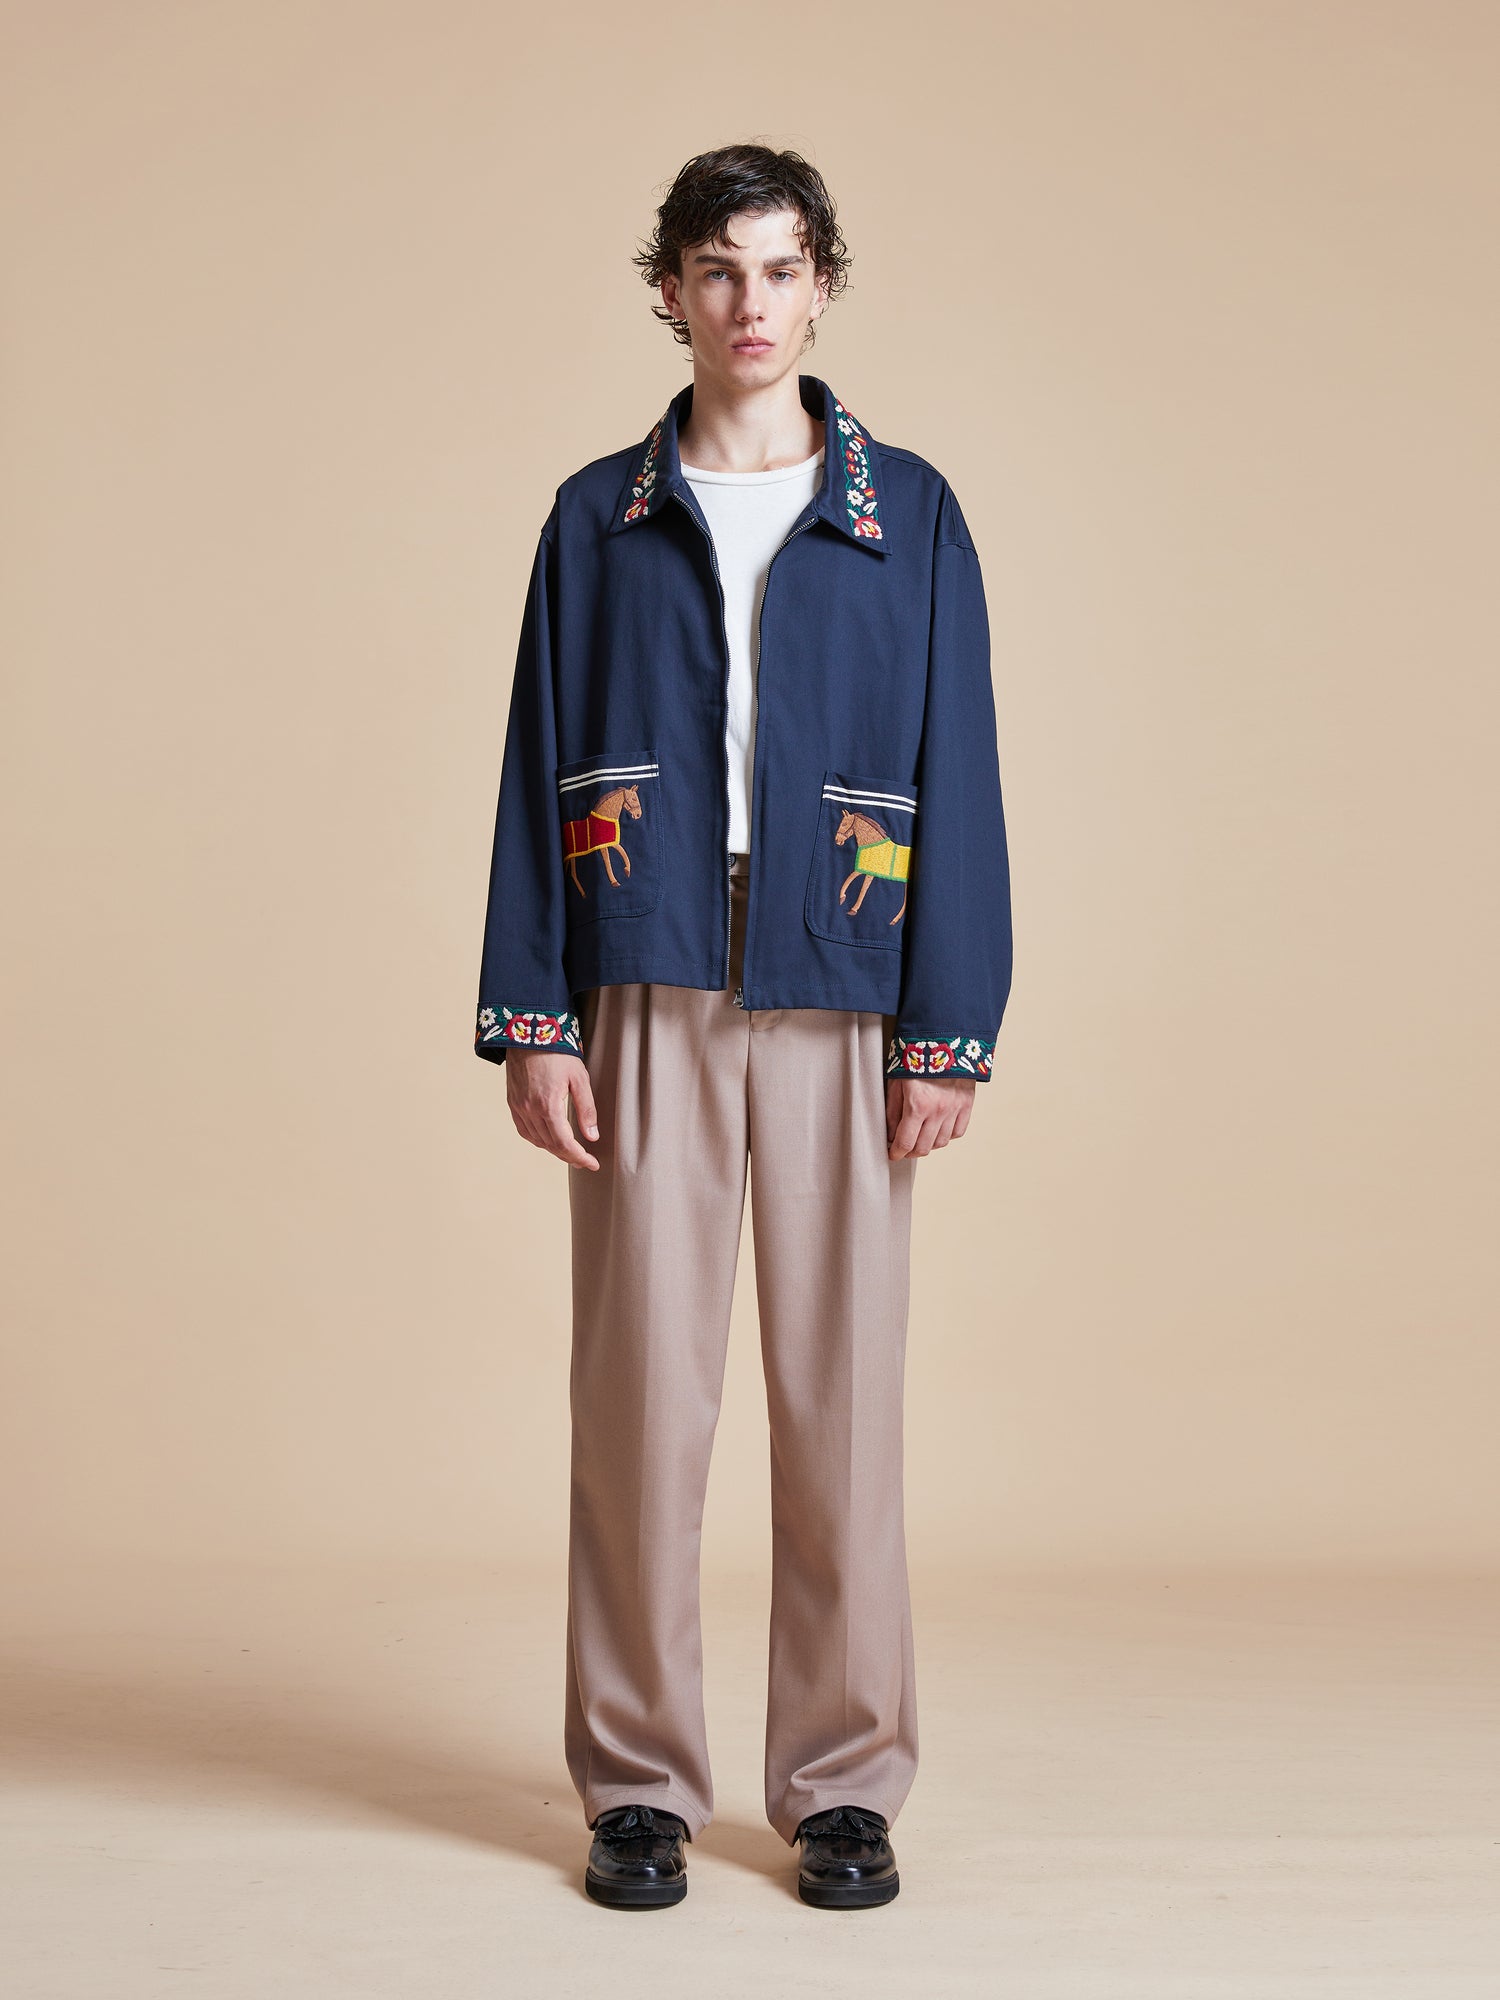 The model is wearing a Found Horse Equine Work Jacket and beige pants.